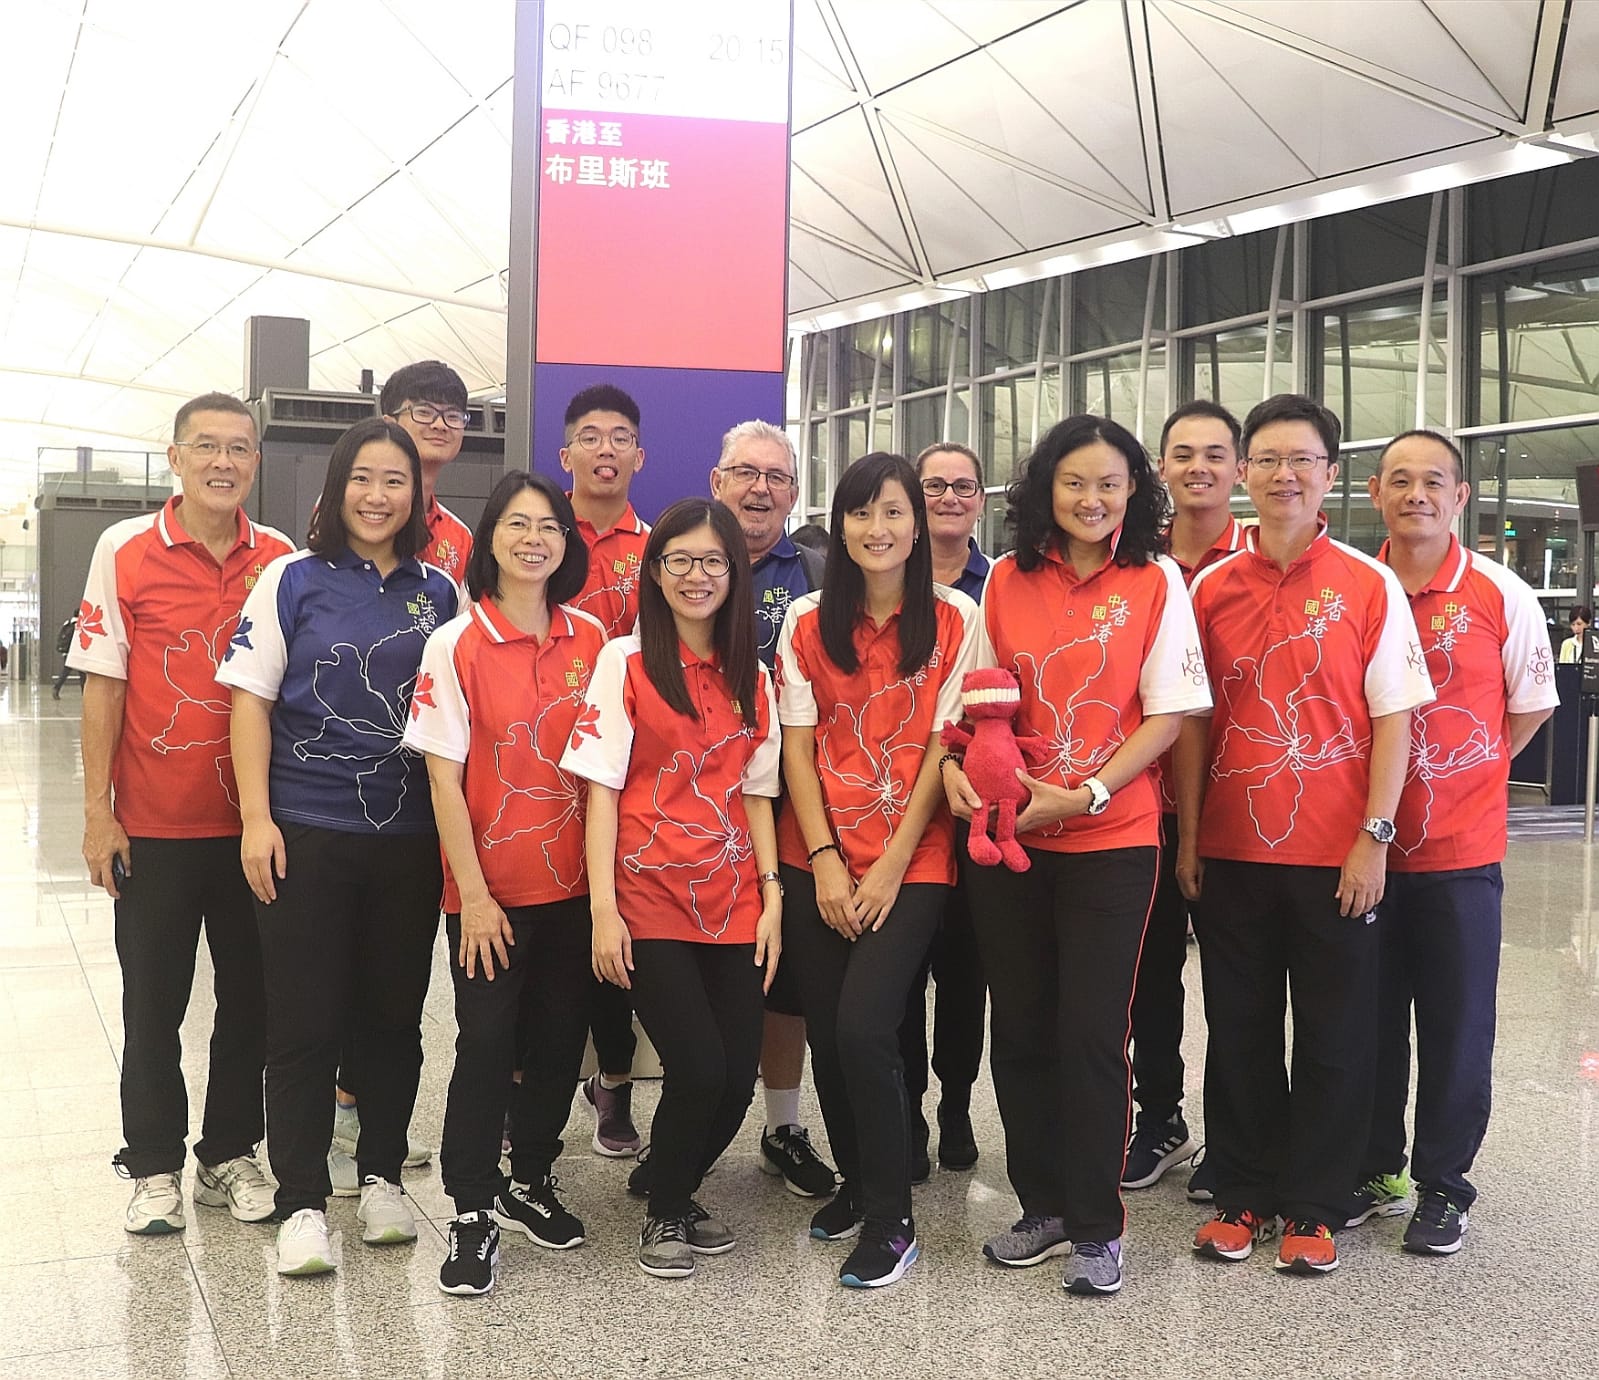 [18/6/2019] Hong Kong Squad – 2019 Asia Pacific Championships Updated